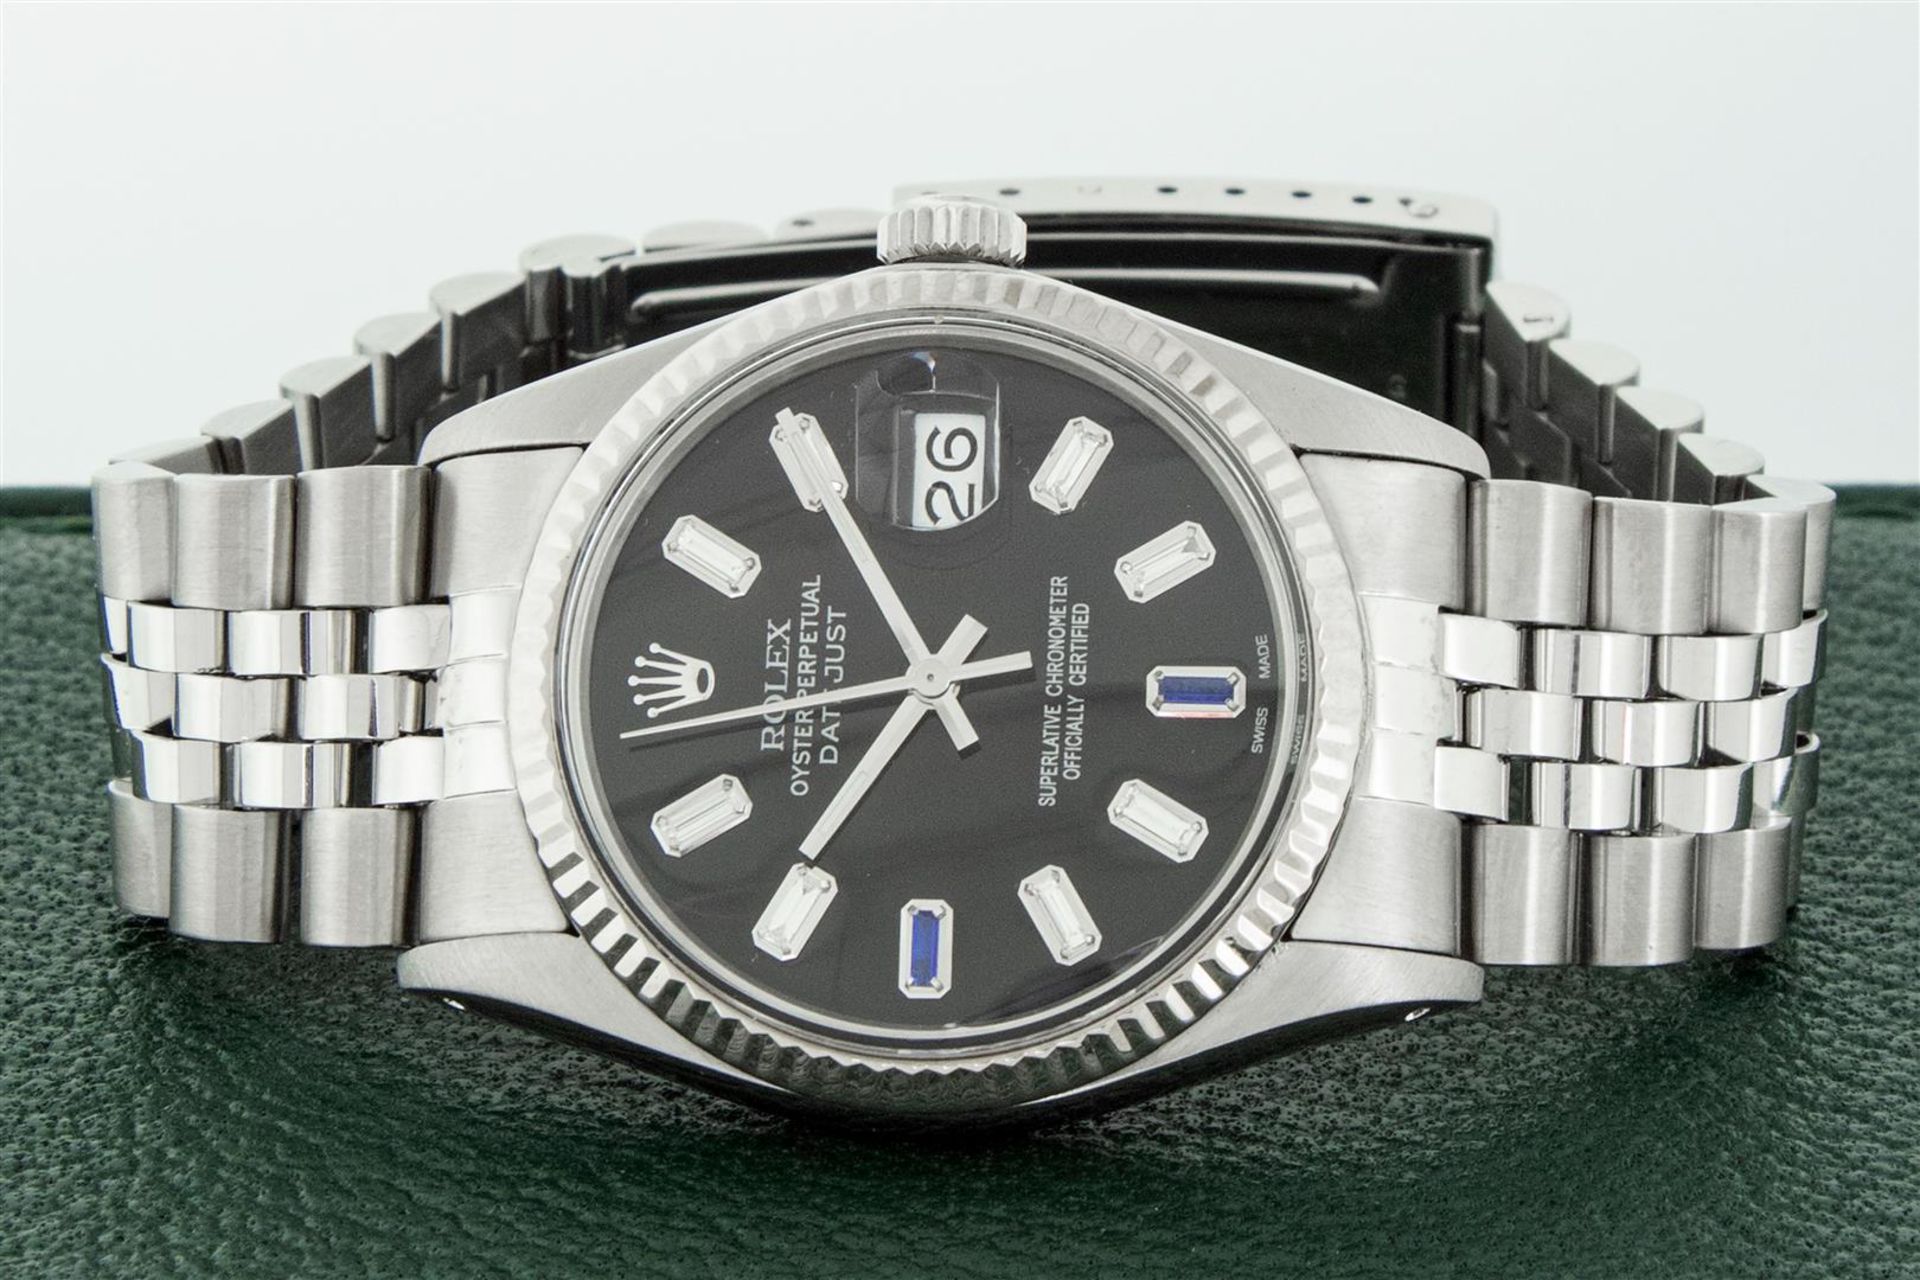 Rolex Mens Stainless Steel 36mm Black Diamond Dial Datejust Wristwatch - Image 5 of 14